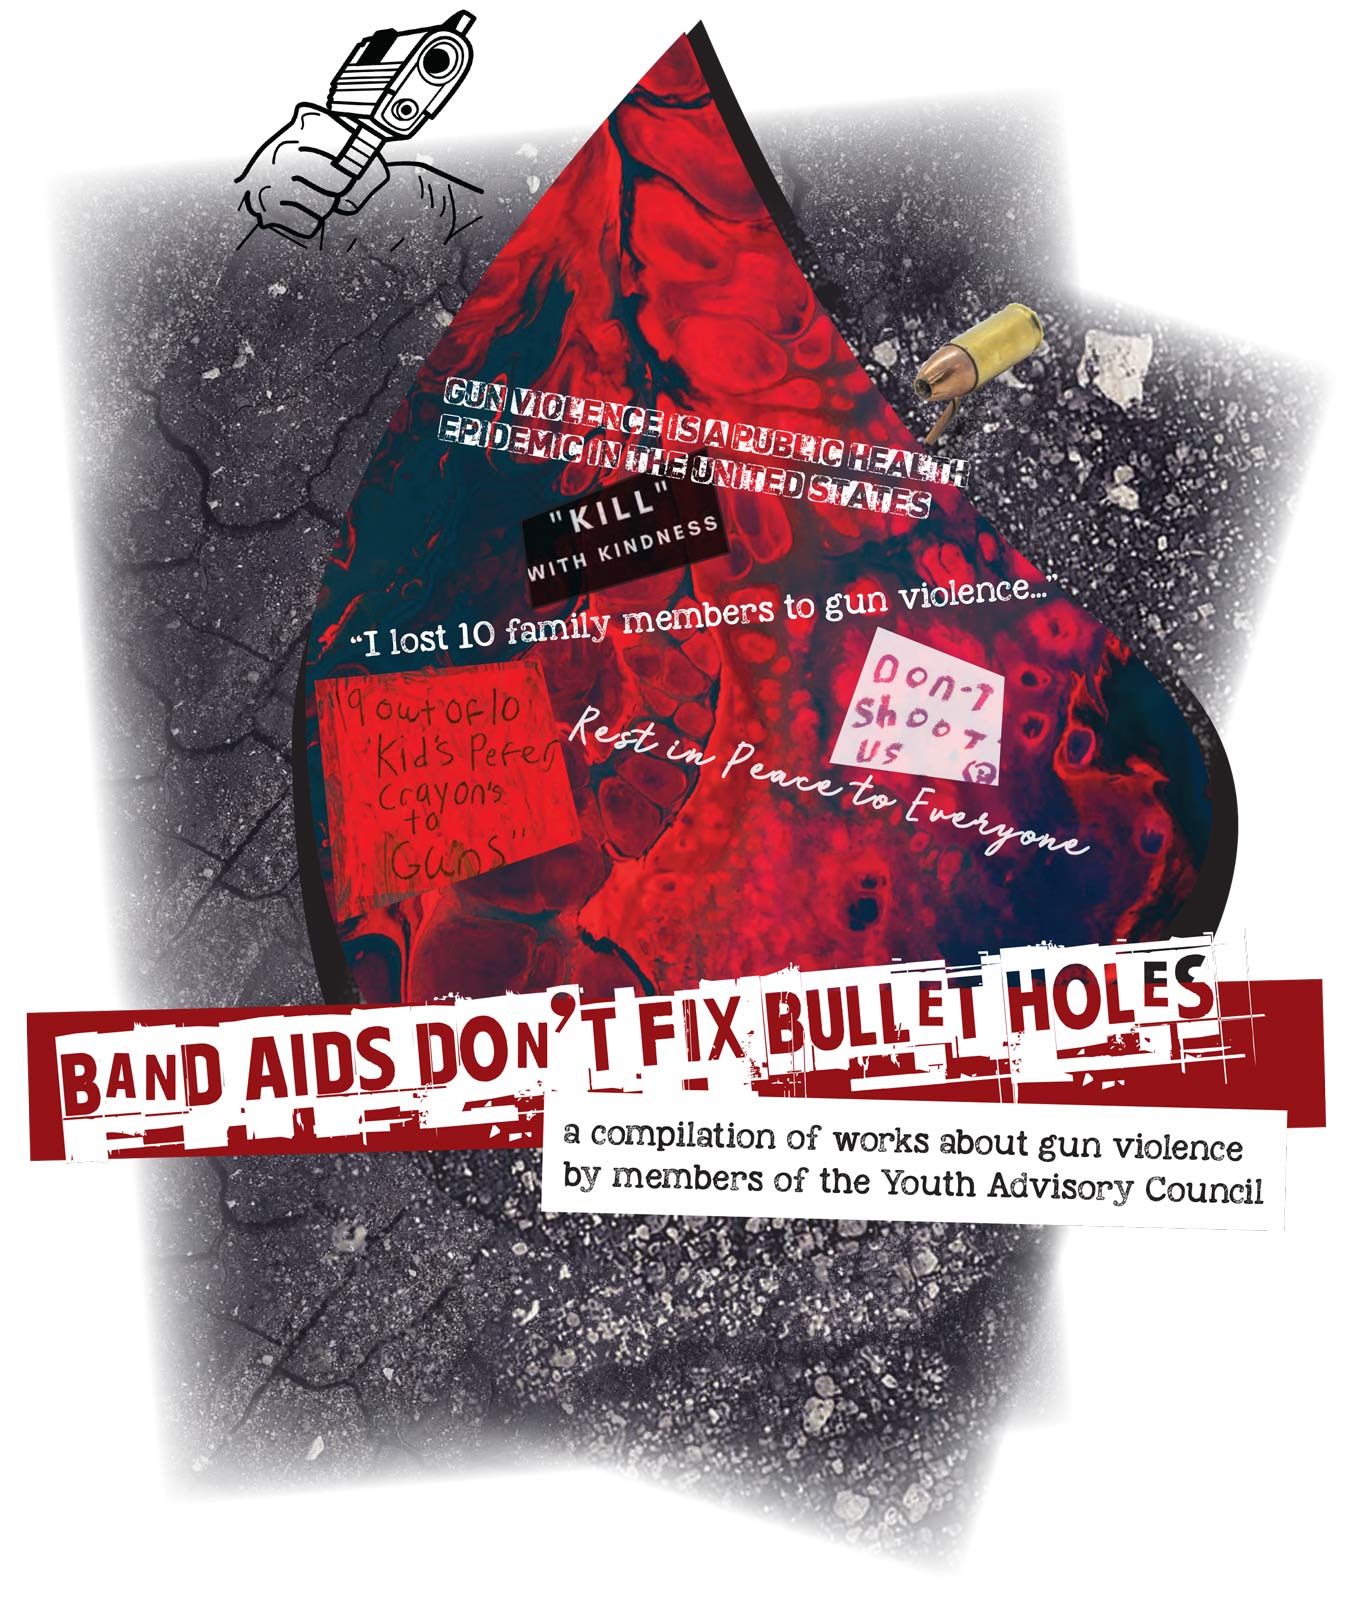 Band Aids Don't Fix Bullet Holes zine cover graphics include gun, bullet, stylized blood drop. Text - Kill with Kindness, I lost 10 family members to gun violence, Don't shoot us, Rest in Peace to Everyone, 9 out of 10 kids prefer crayons to guns